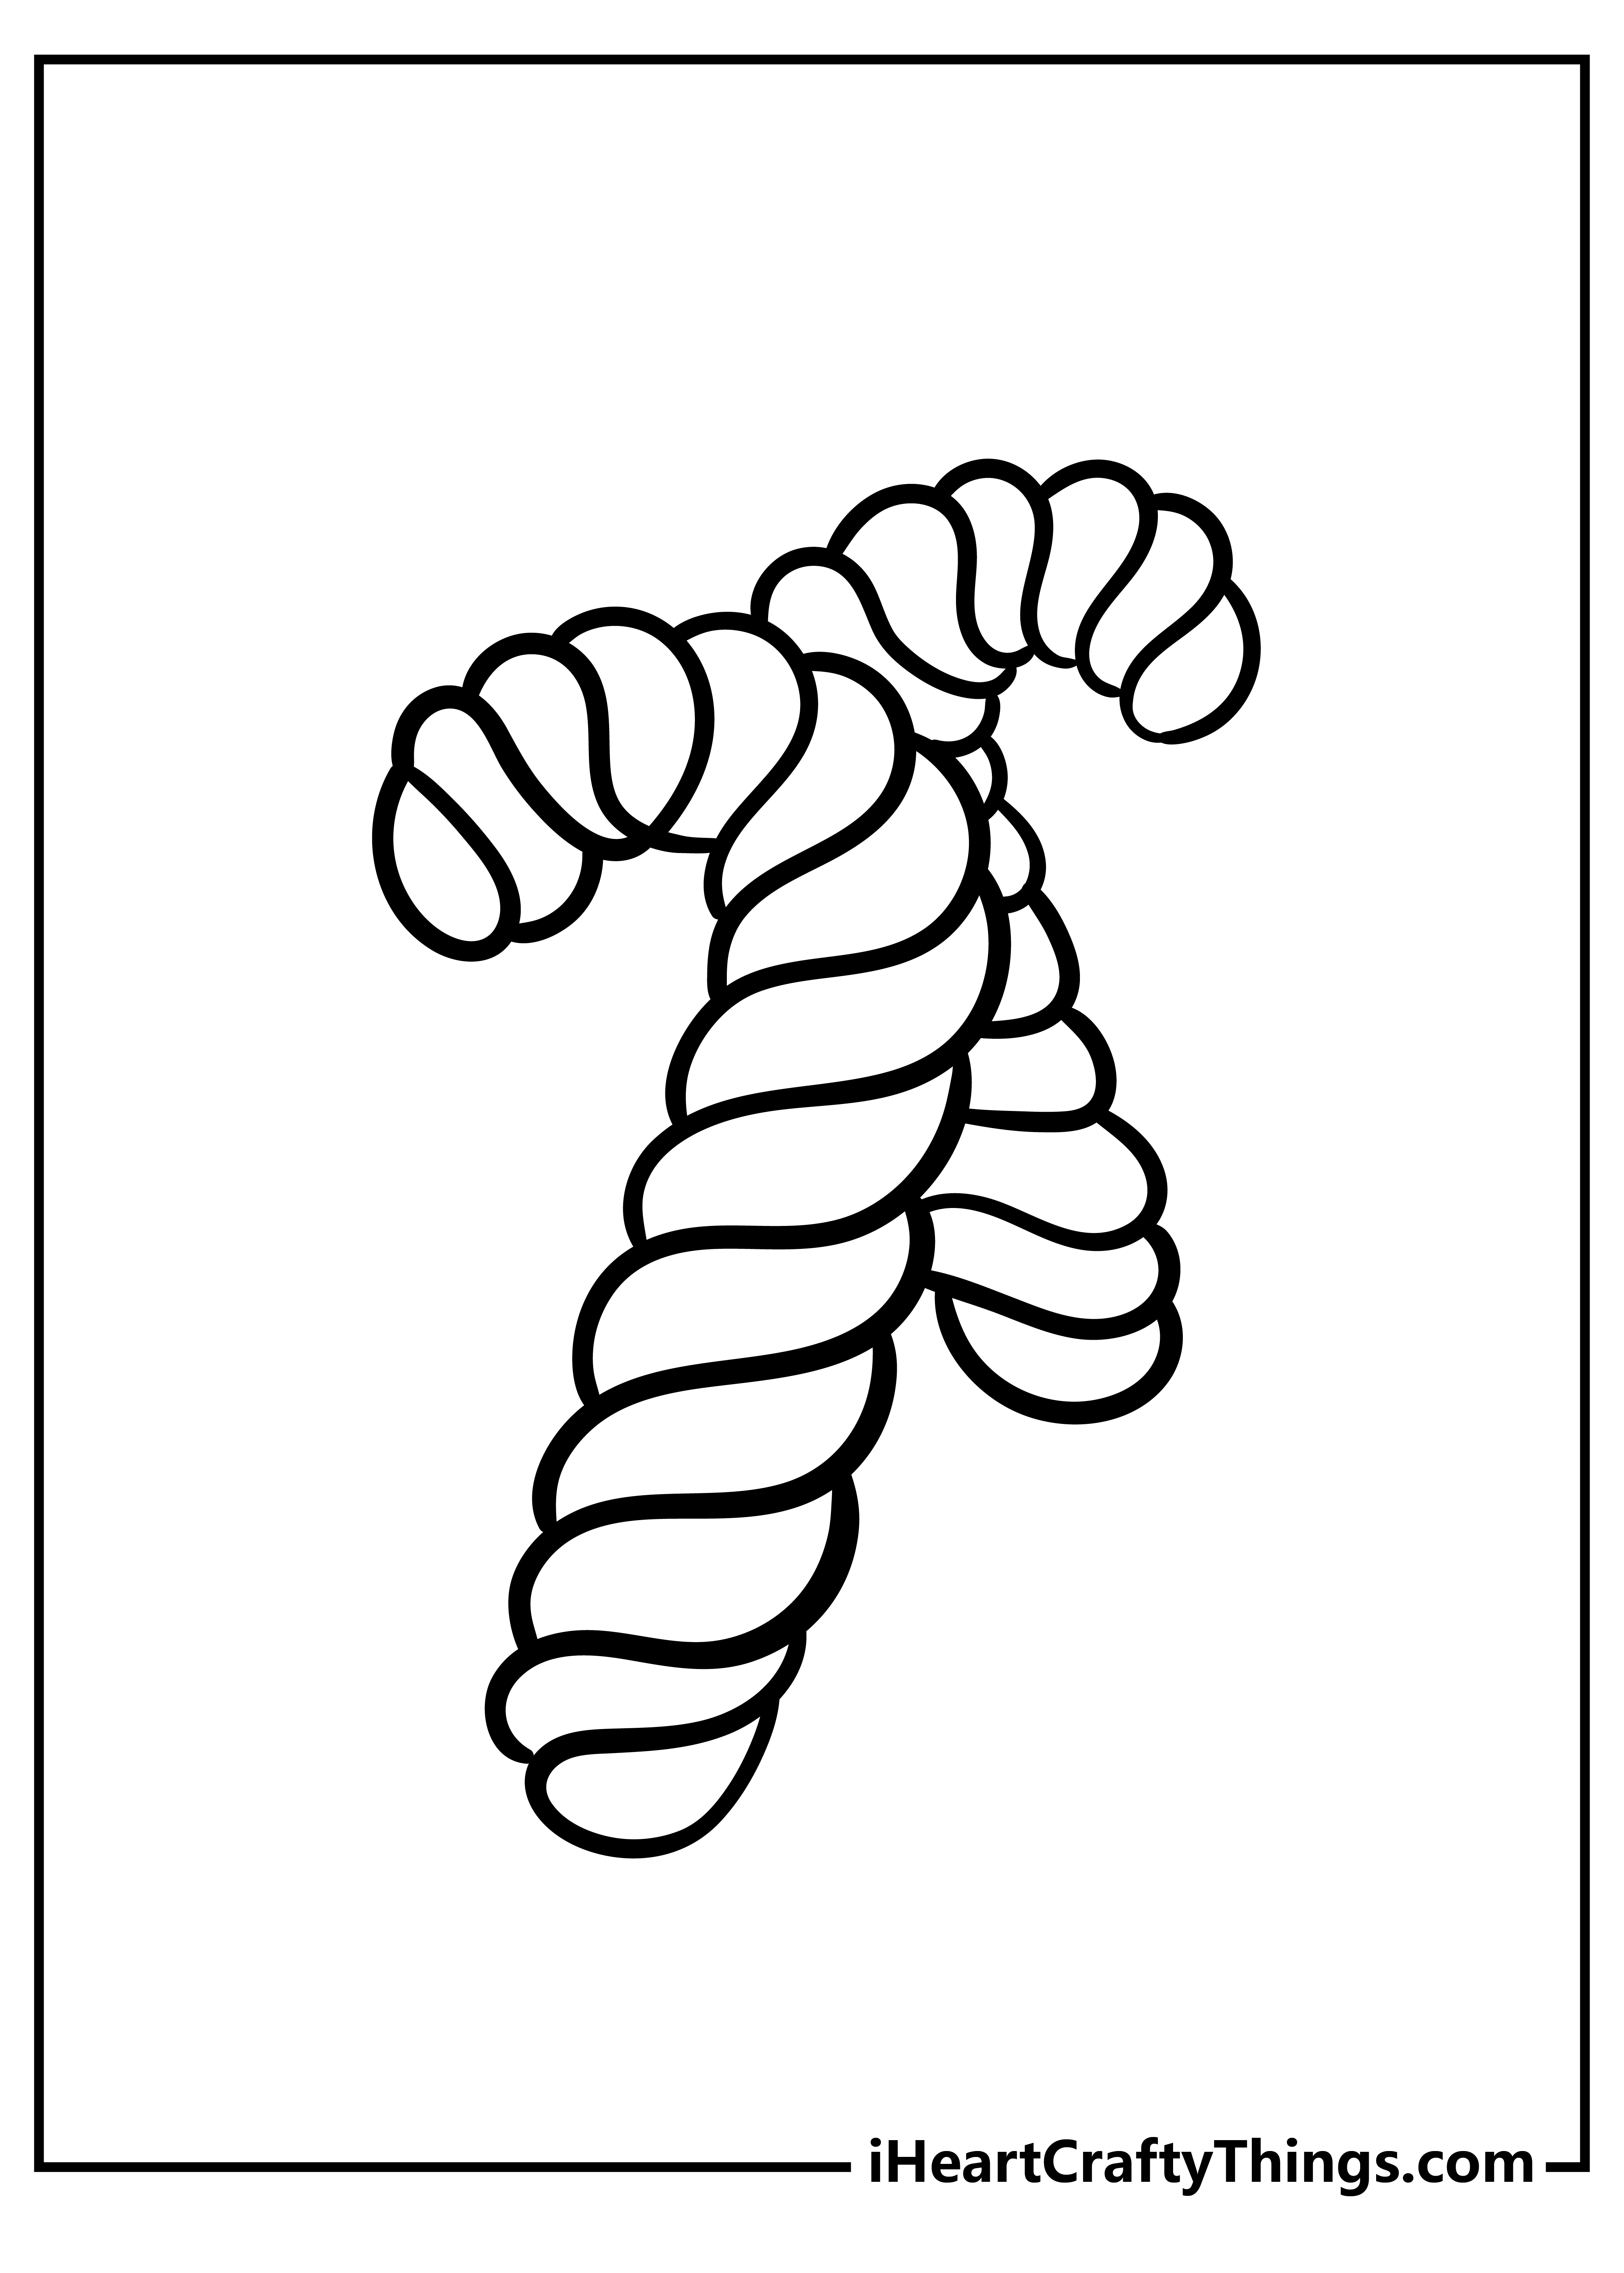 Candy Cane Coloring Pages free pdf download